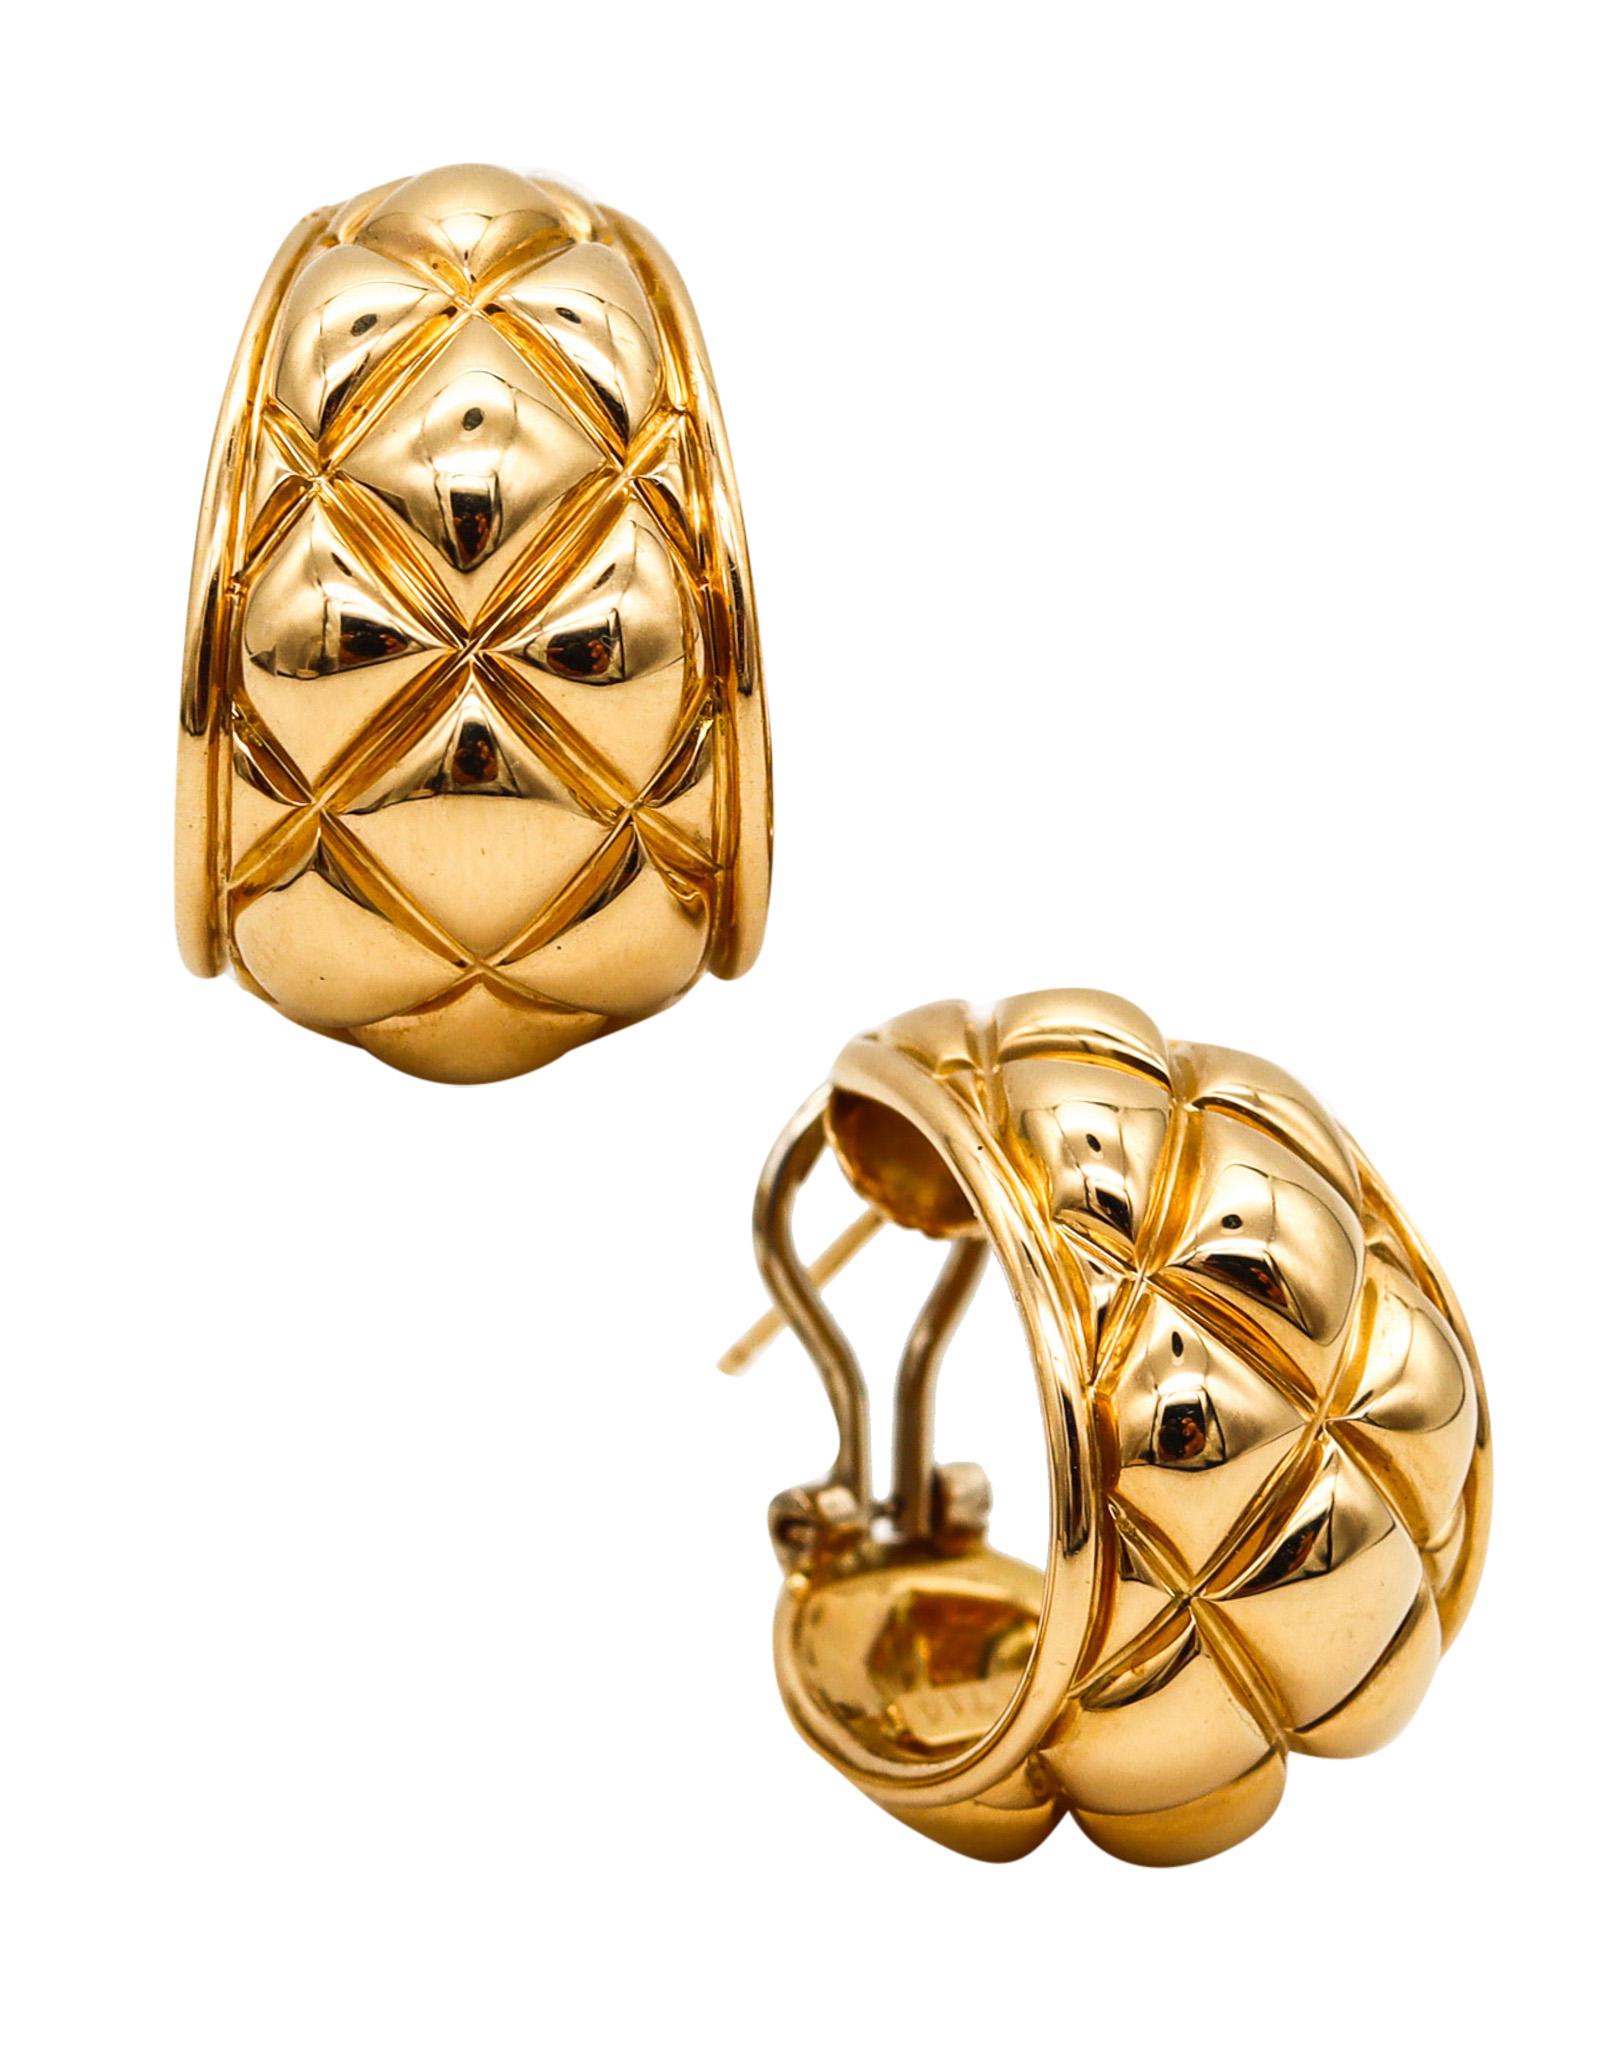 Quilted hoops earrings designed by Chaumet.

A vintage pair of earrings, made in Paris France by the jewelry house of Chaumet, back in the 1970's. This earrings has been crafted as a left and right pairs, with geometric quilted patterns in solid